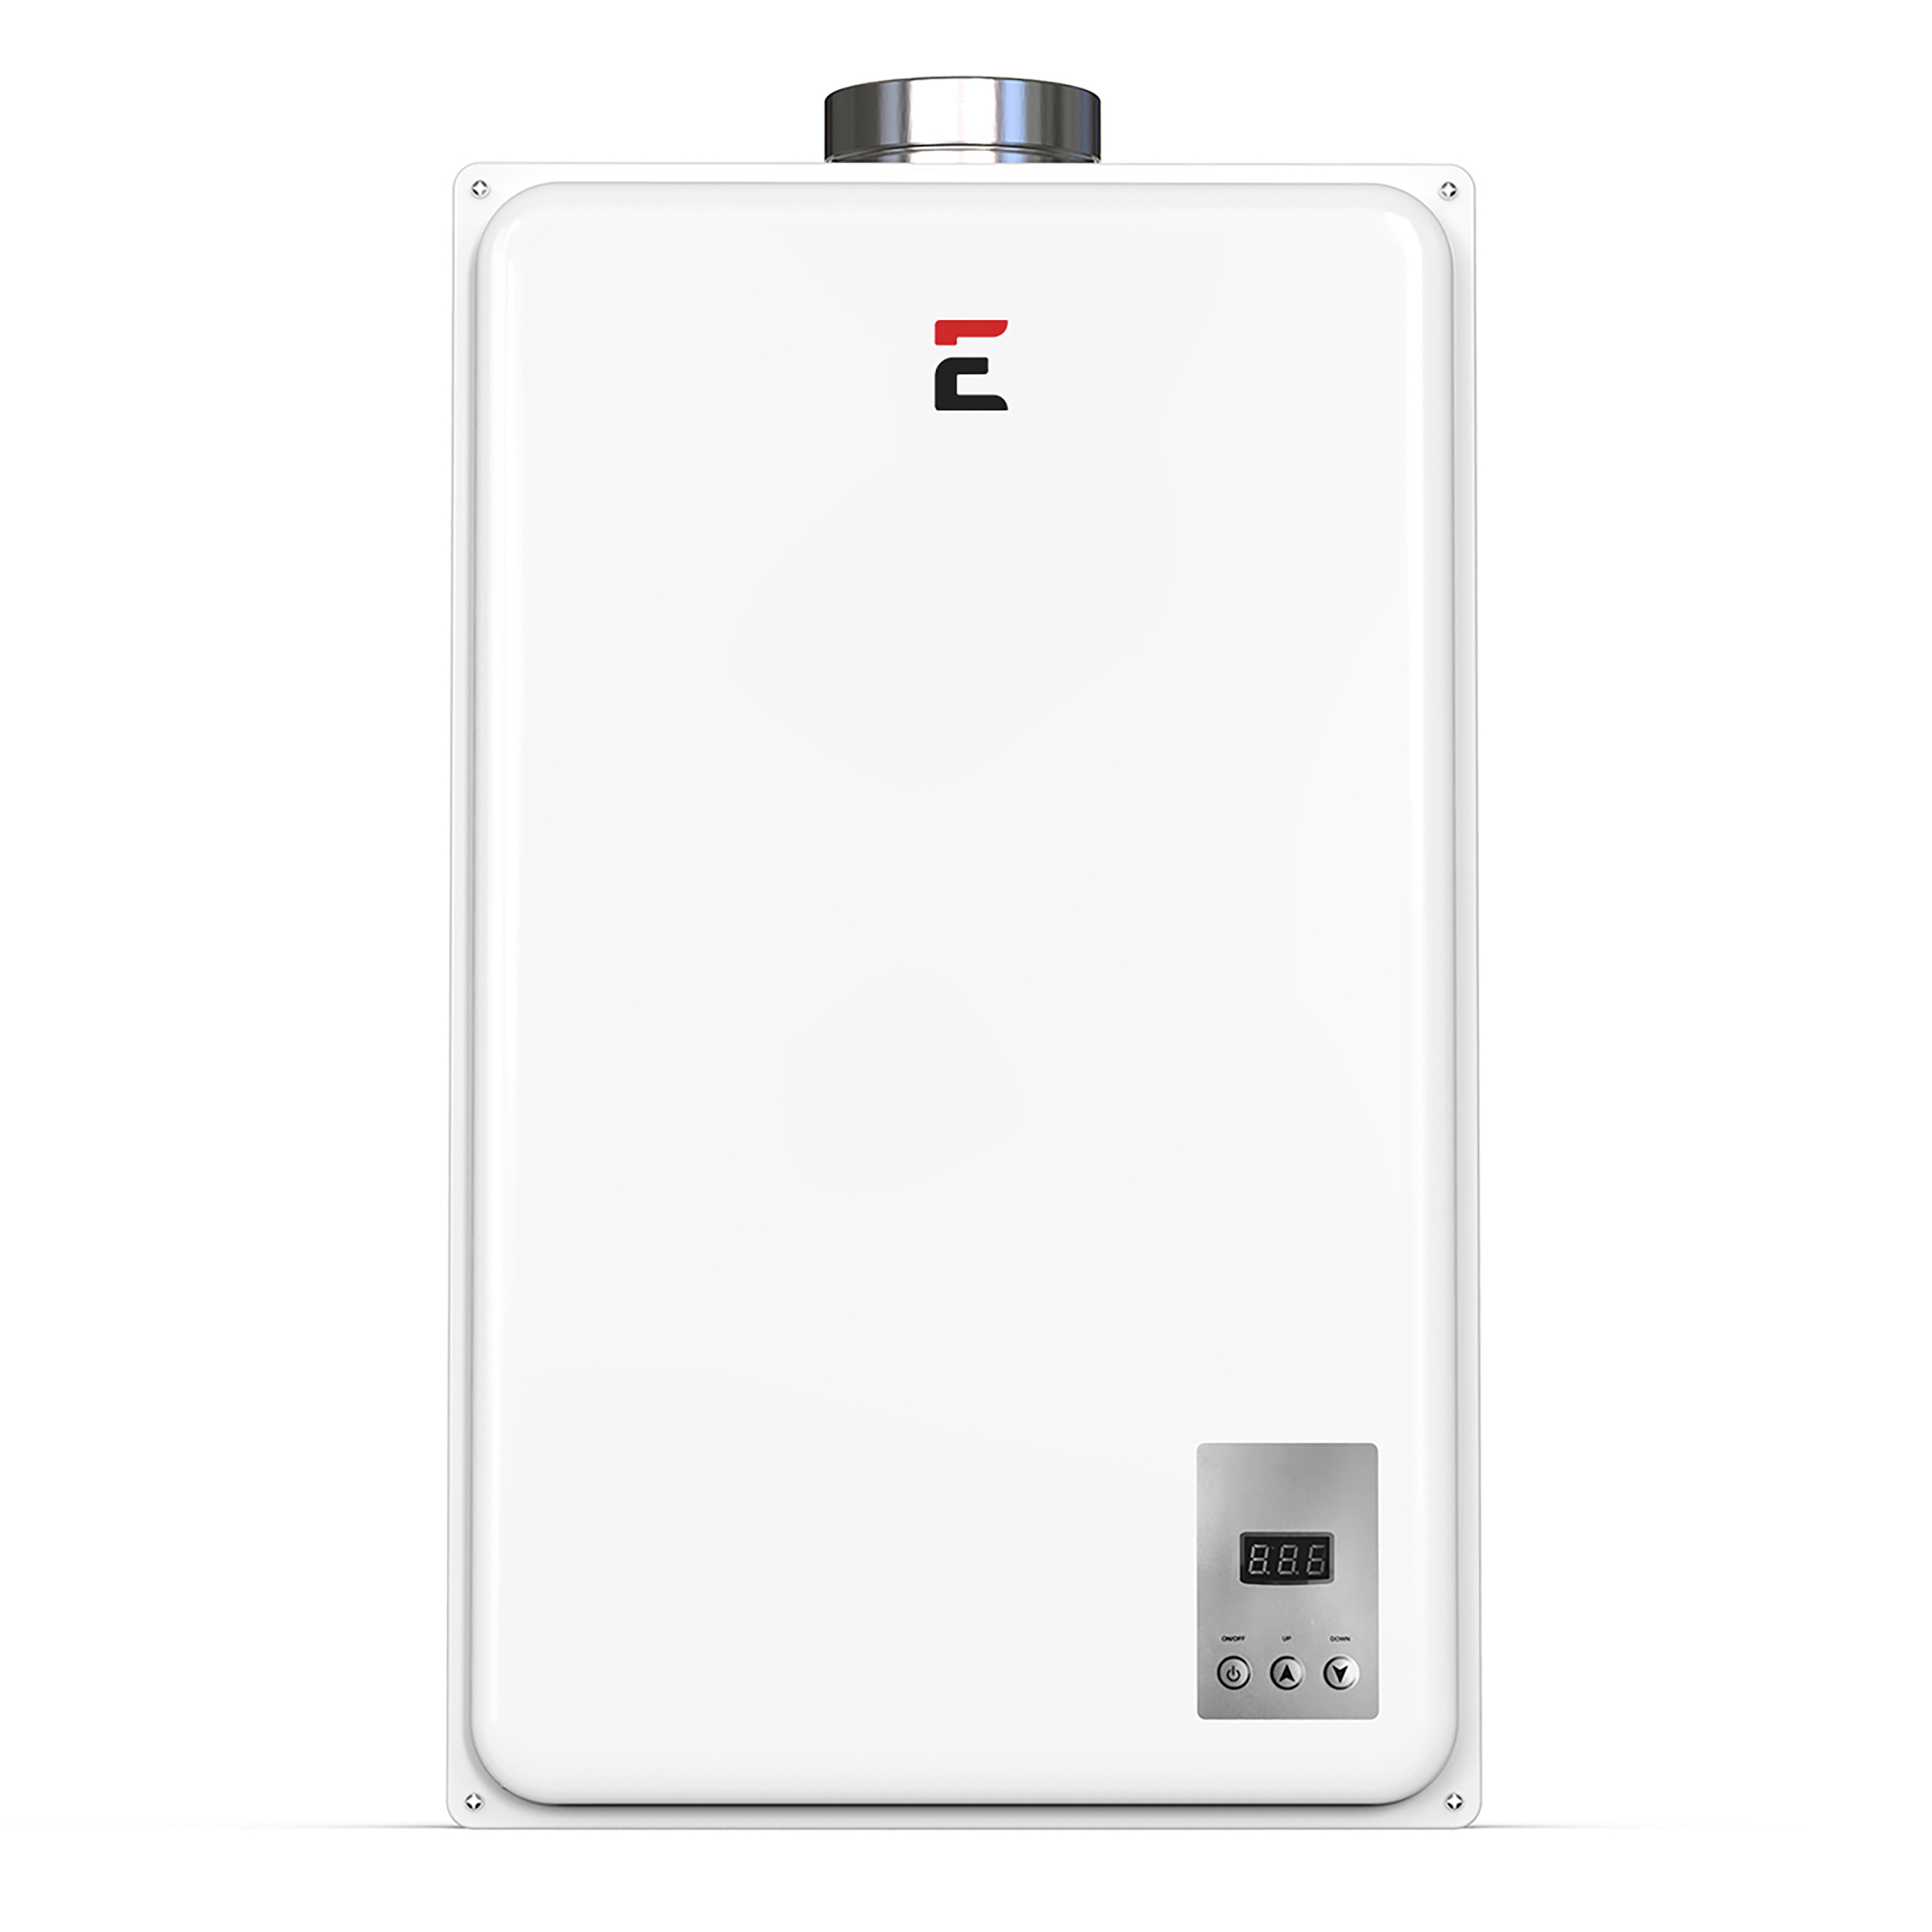 Eccotemp Builder Series Indoor 6.8 GPM Natural Gas Tankless Water Heater 